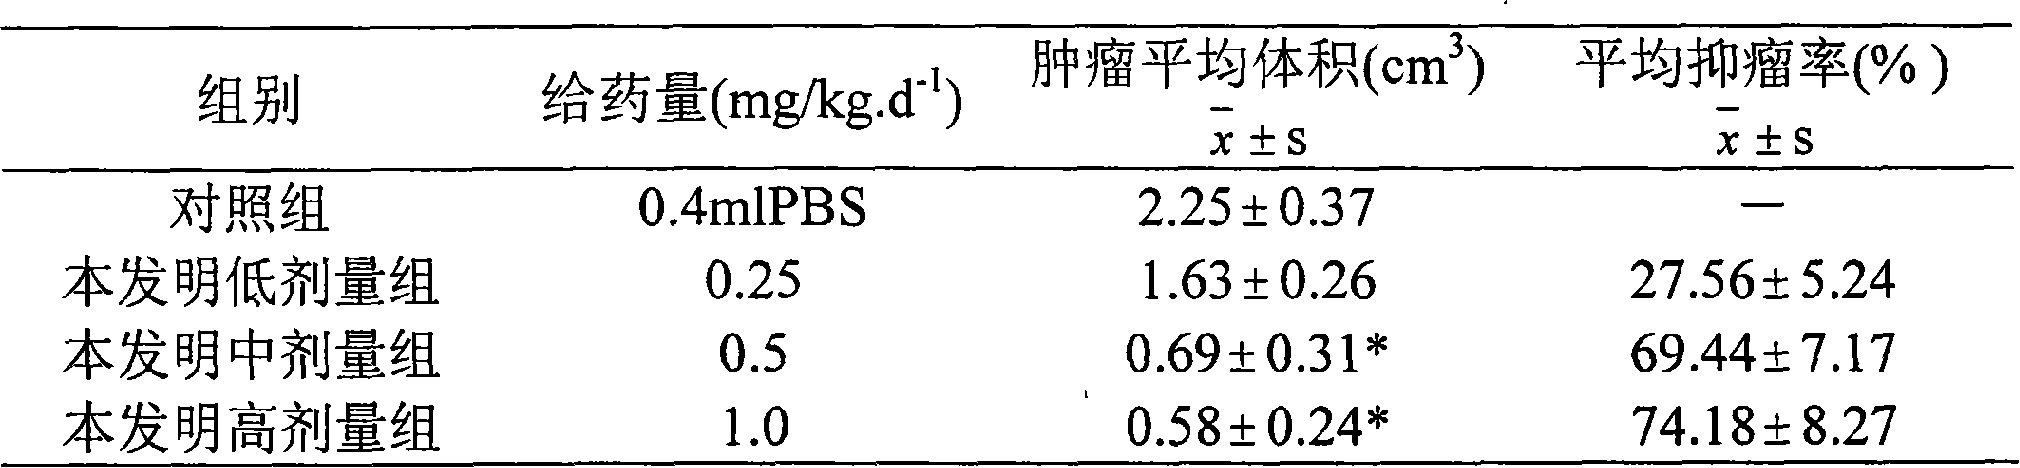 Total sesquiterpene lactone extract containing rich parthenolide and preparation method and application thereof